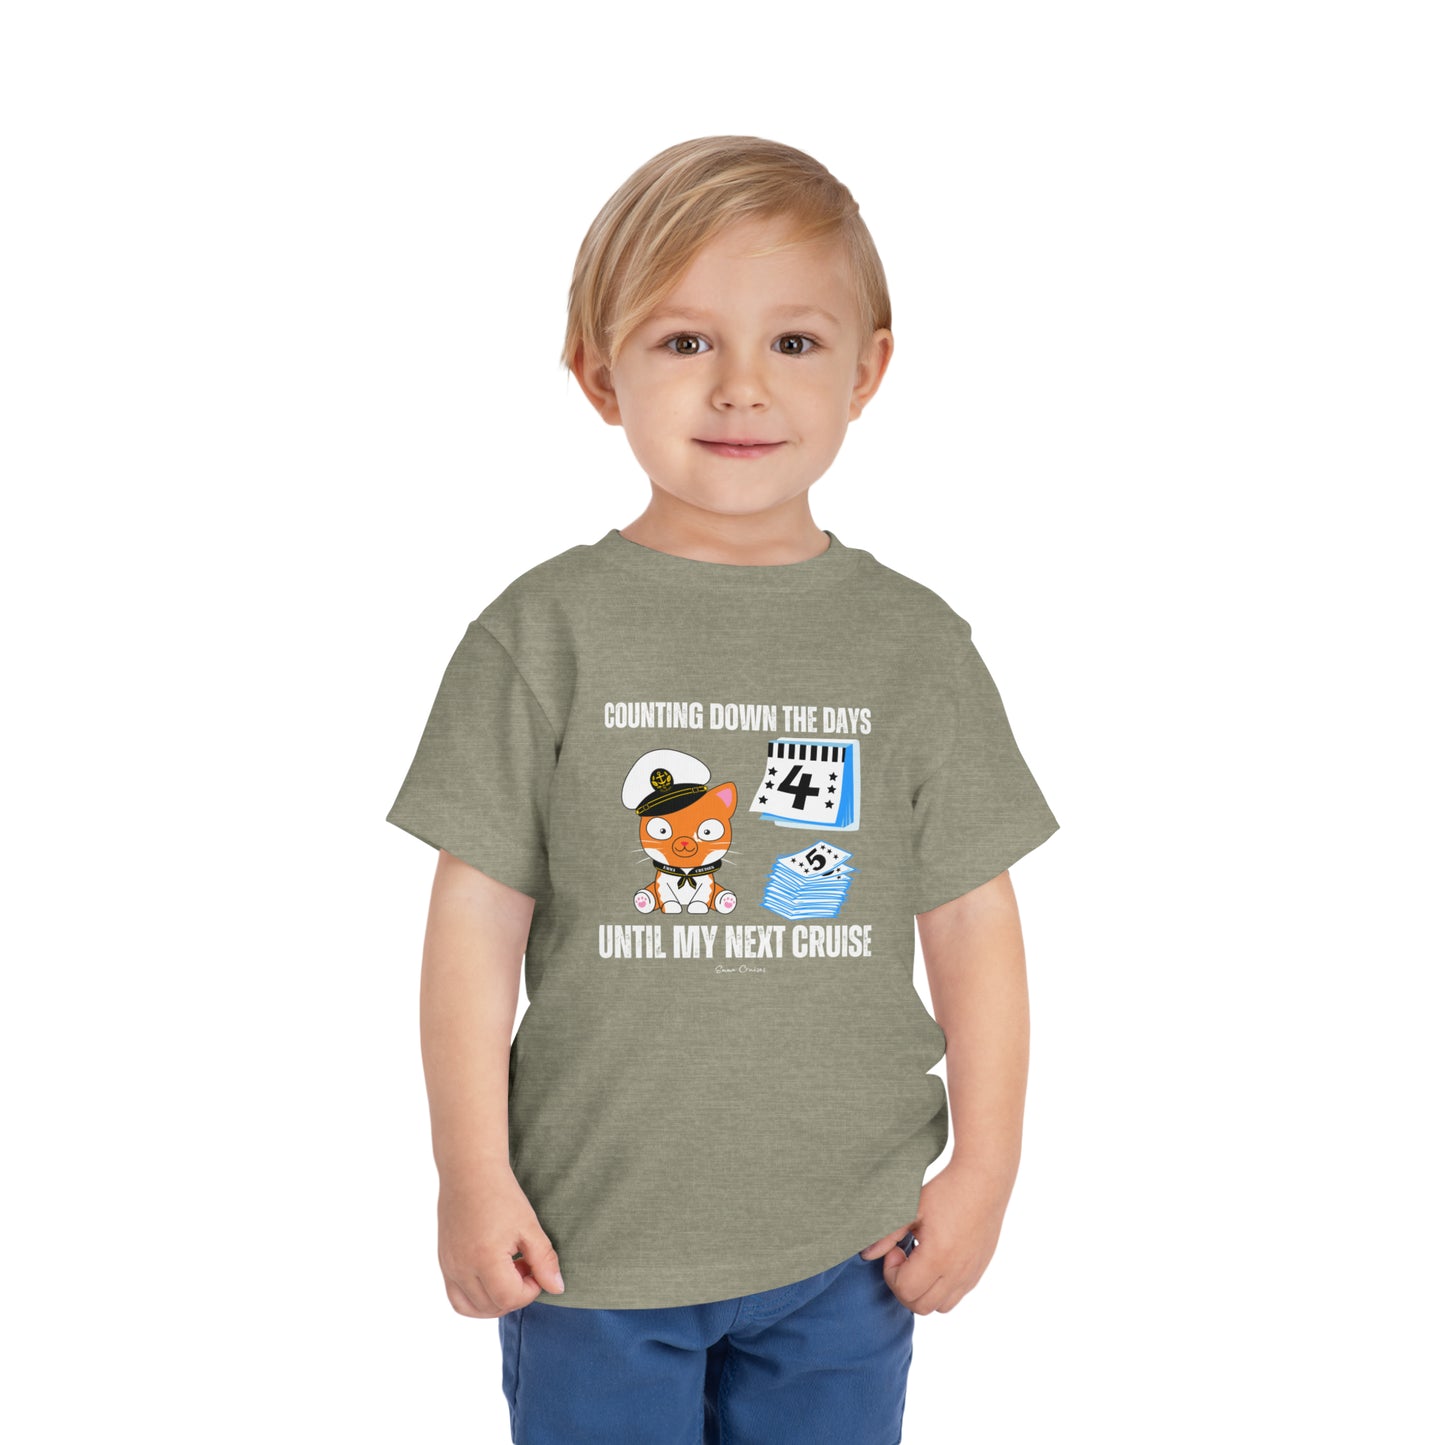 Counting Down the Days - Toddler UNISEX T-Shirt